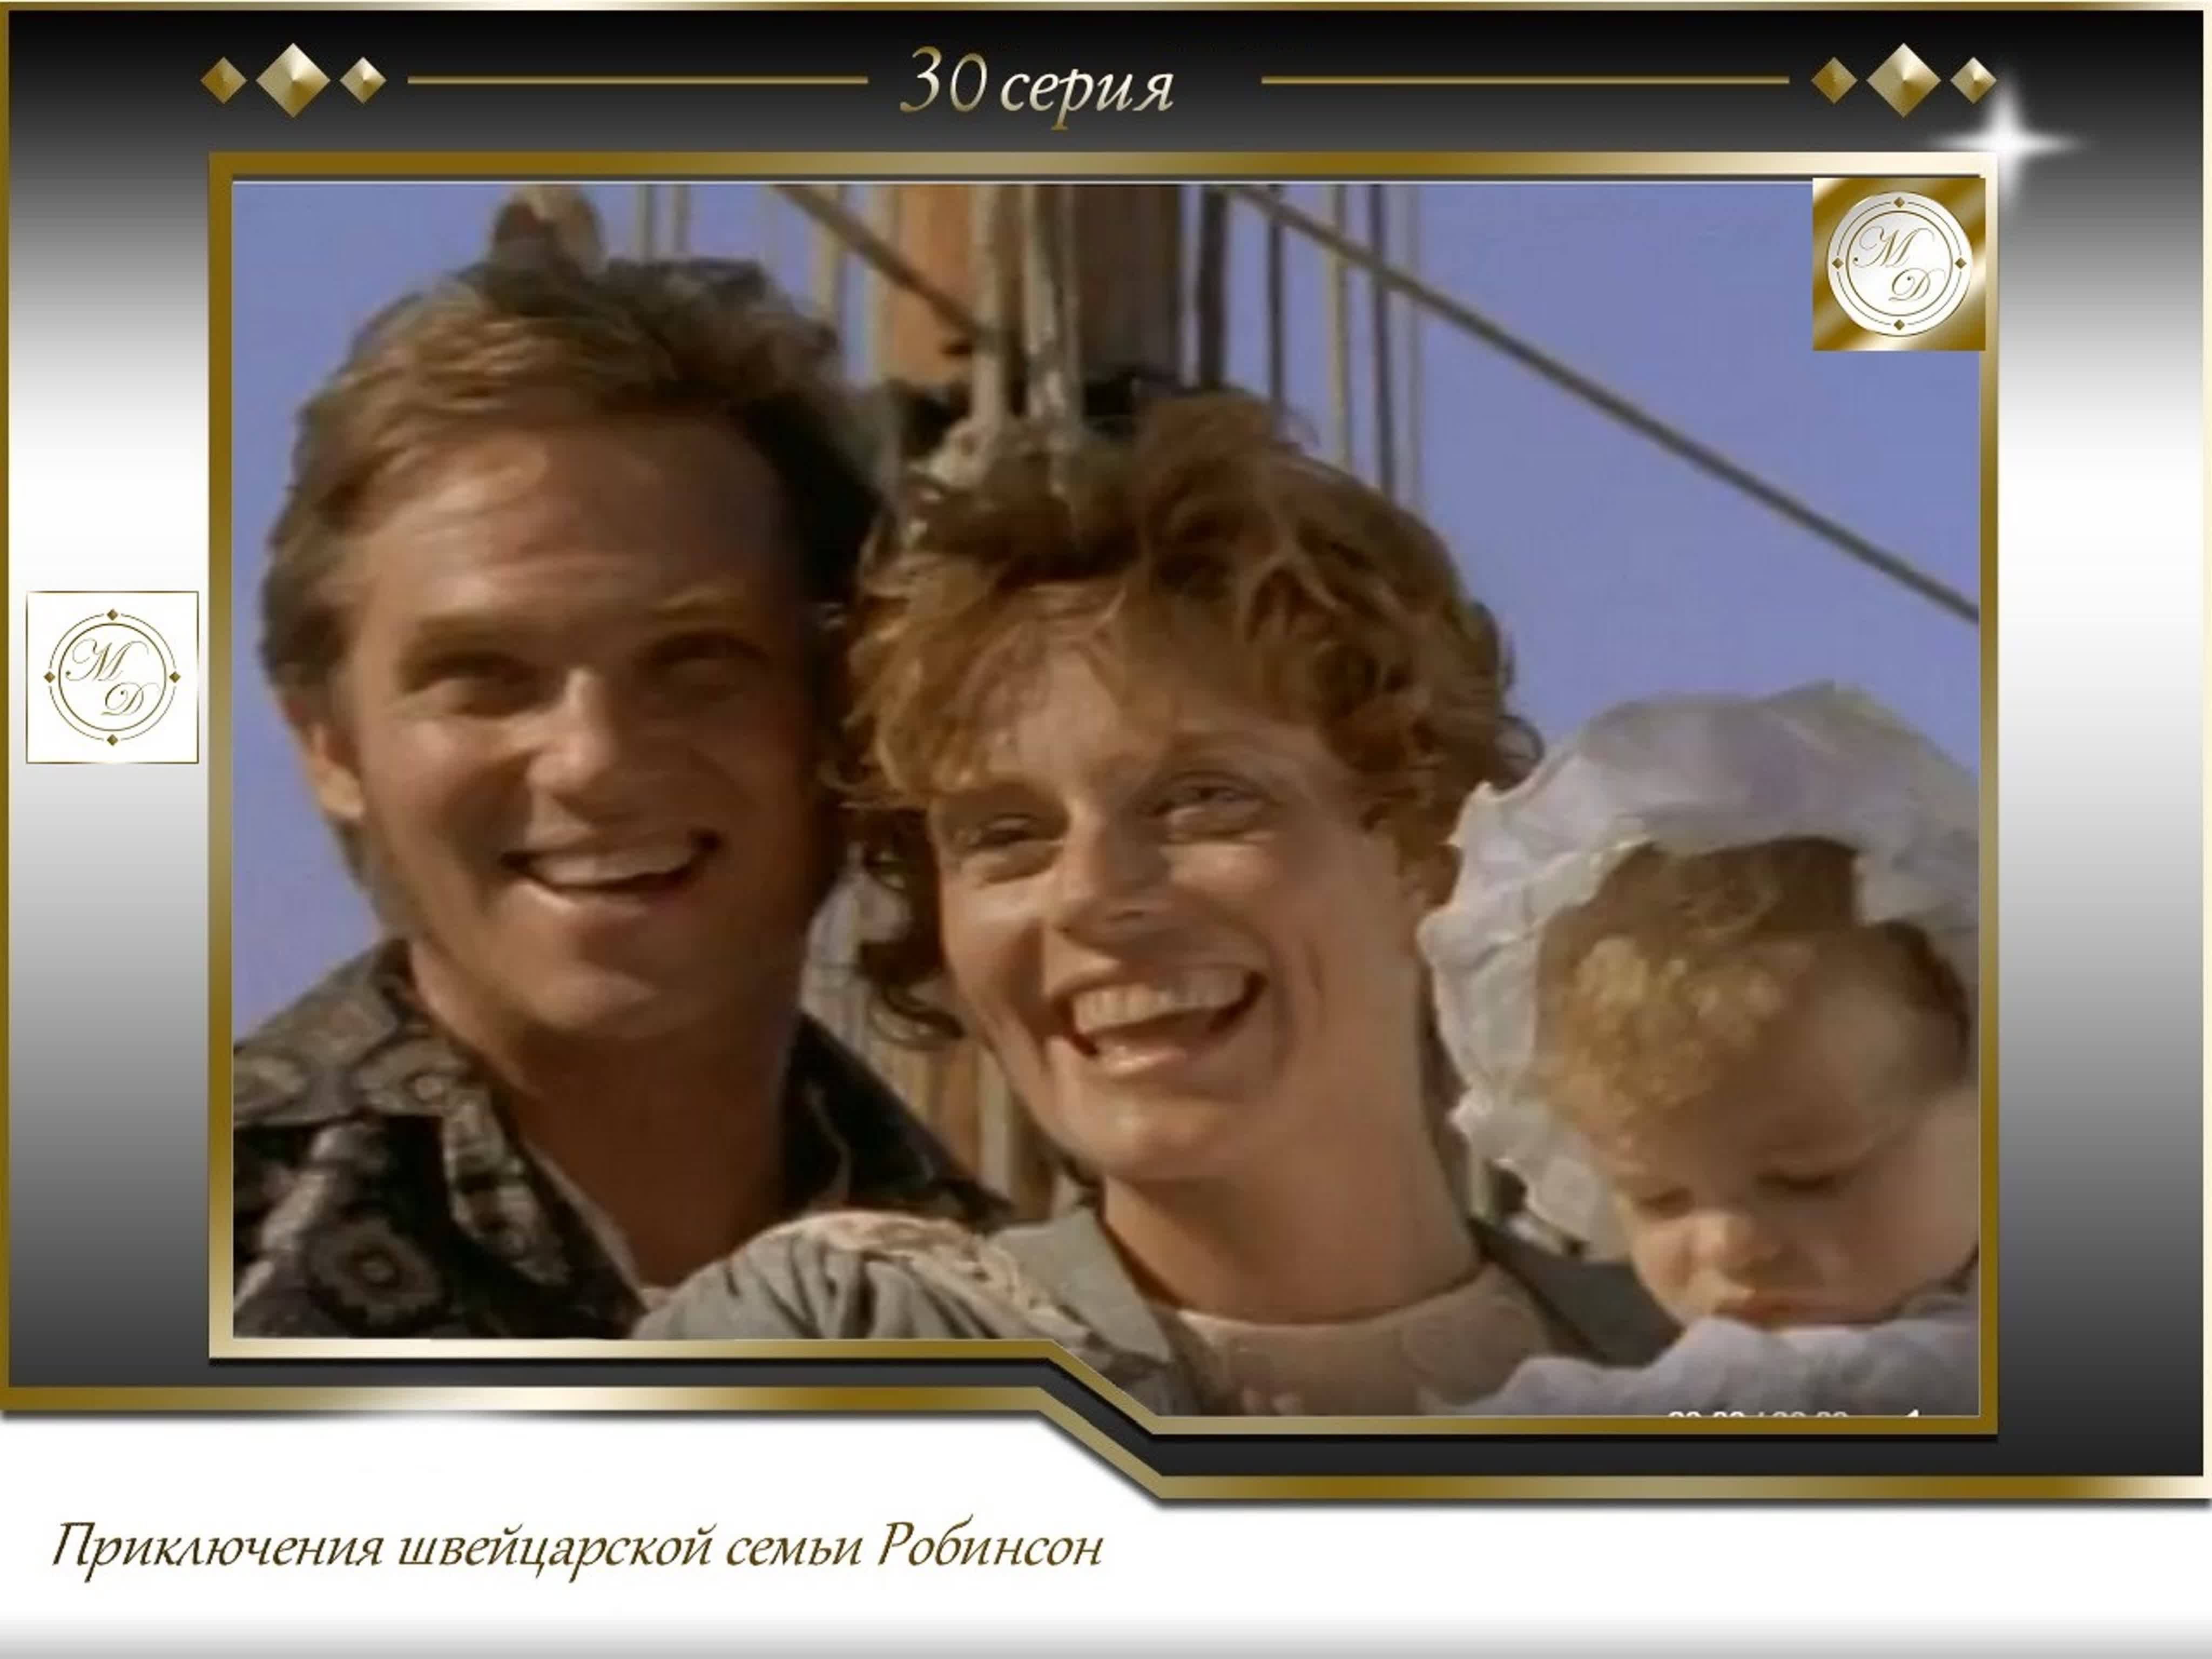 The Adventures of Swiss Family Robinson (1998, New Zealand)